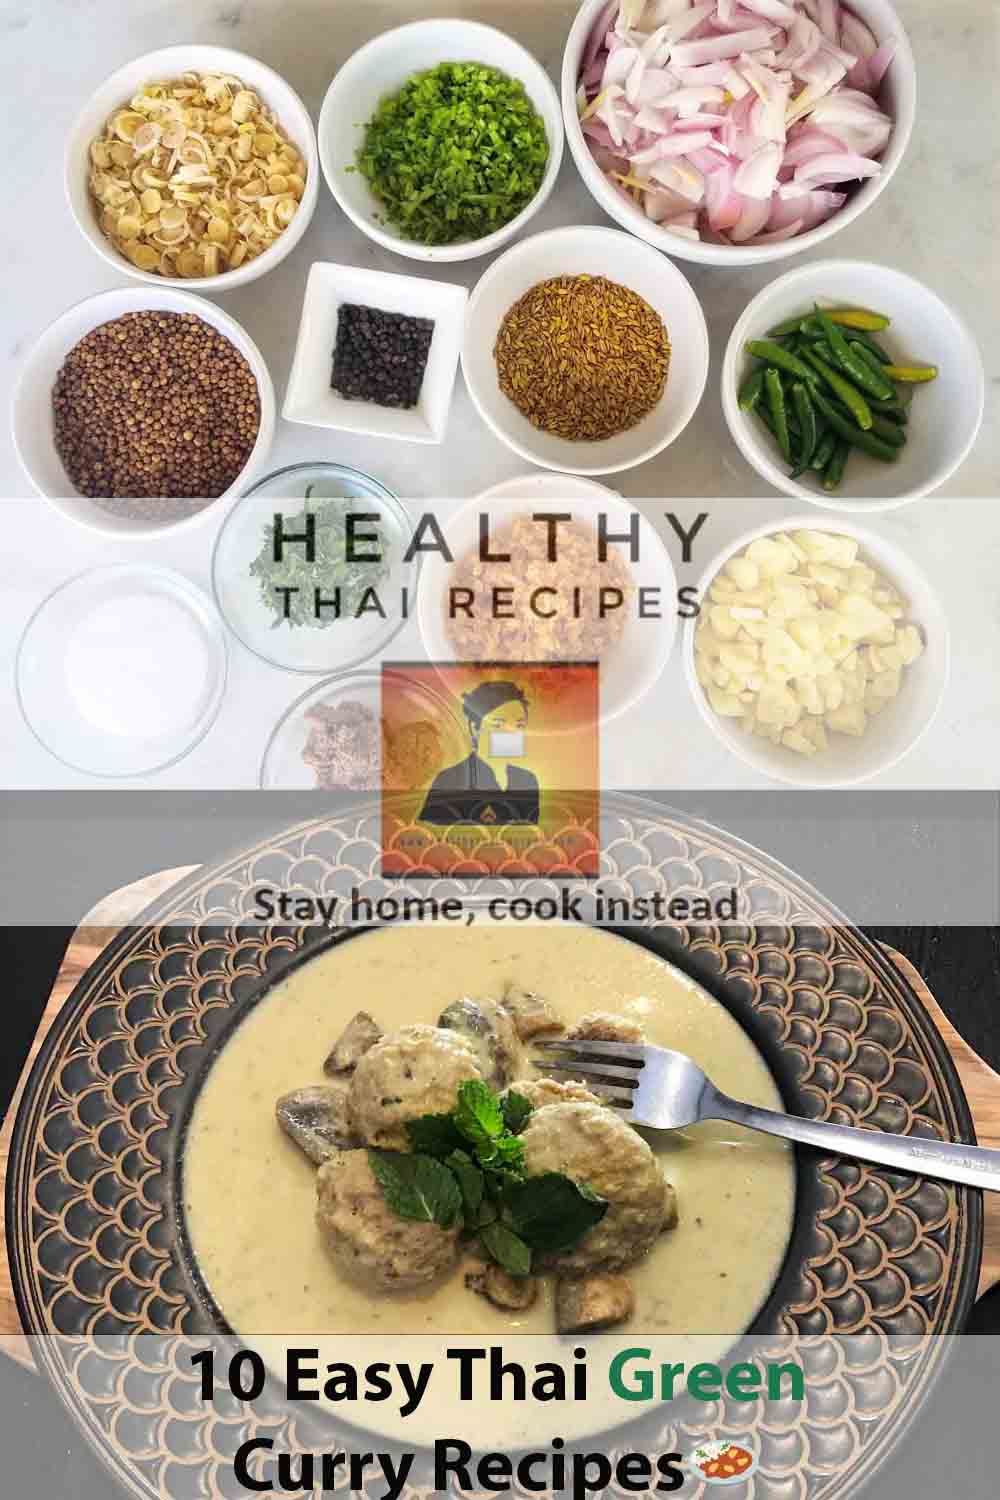 10 Easy Thai Green Curry Recipes Pinterest Image